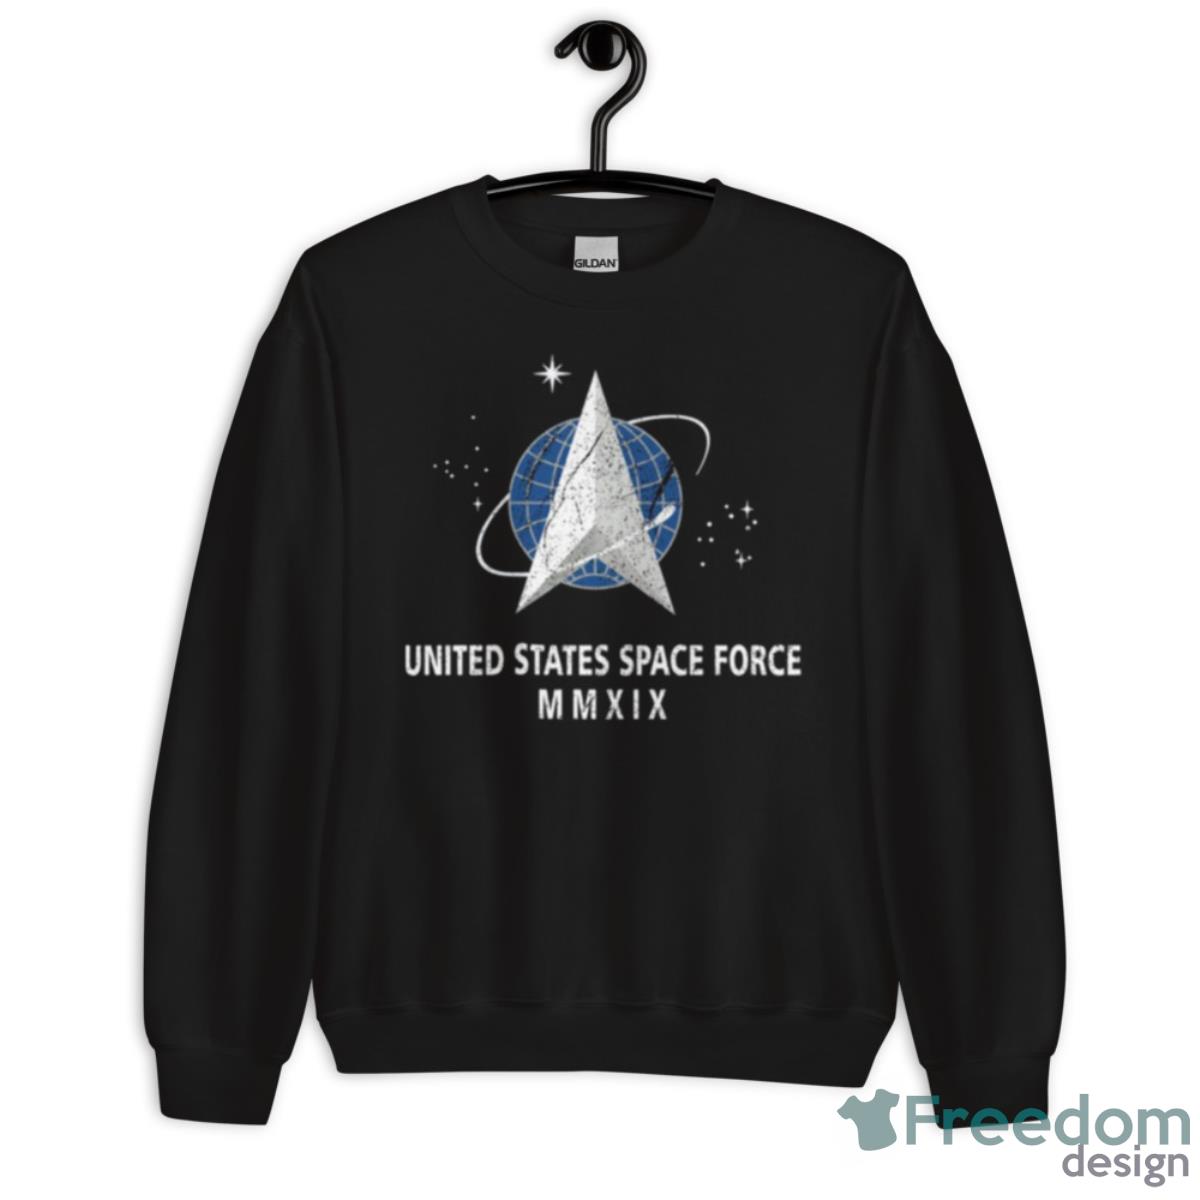 New United States Space Force Flag Distressed Shirt